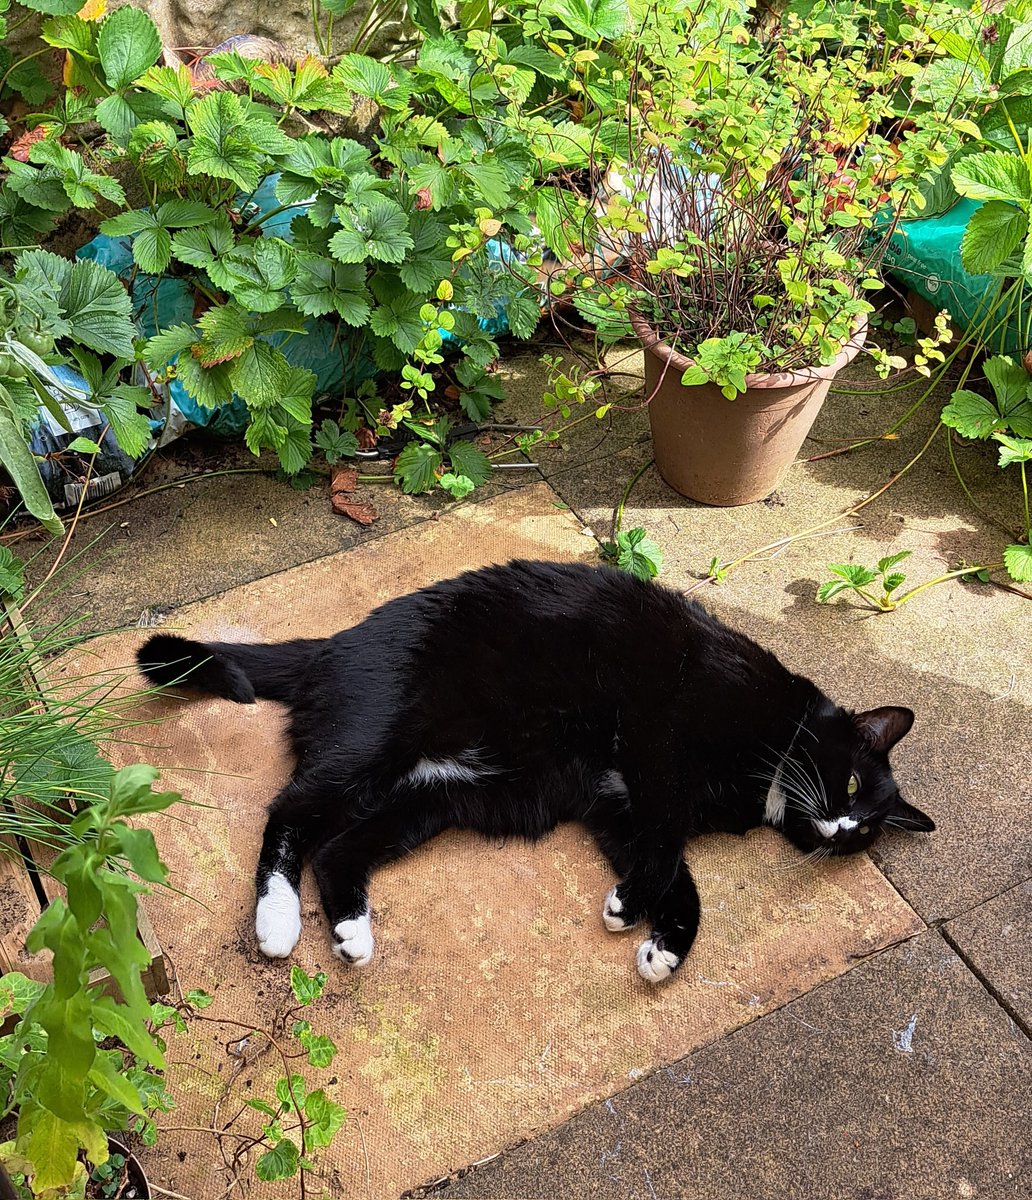 Hard work doing my CATNIP  #Hedgewatch shift this afternoon. I had to check the strawberry plants for runners that mum can plant! Just call me Bella Titchmarsh! #CatsOfTwitter #XCats #TuxieCats